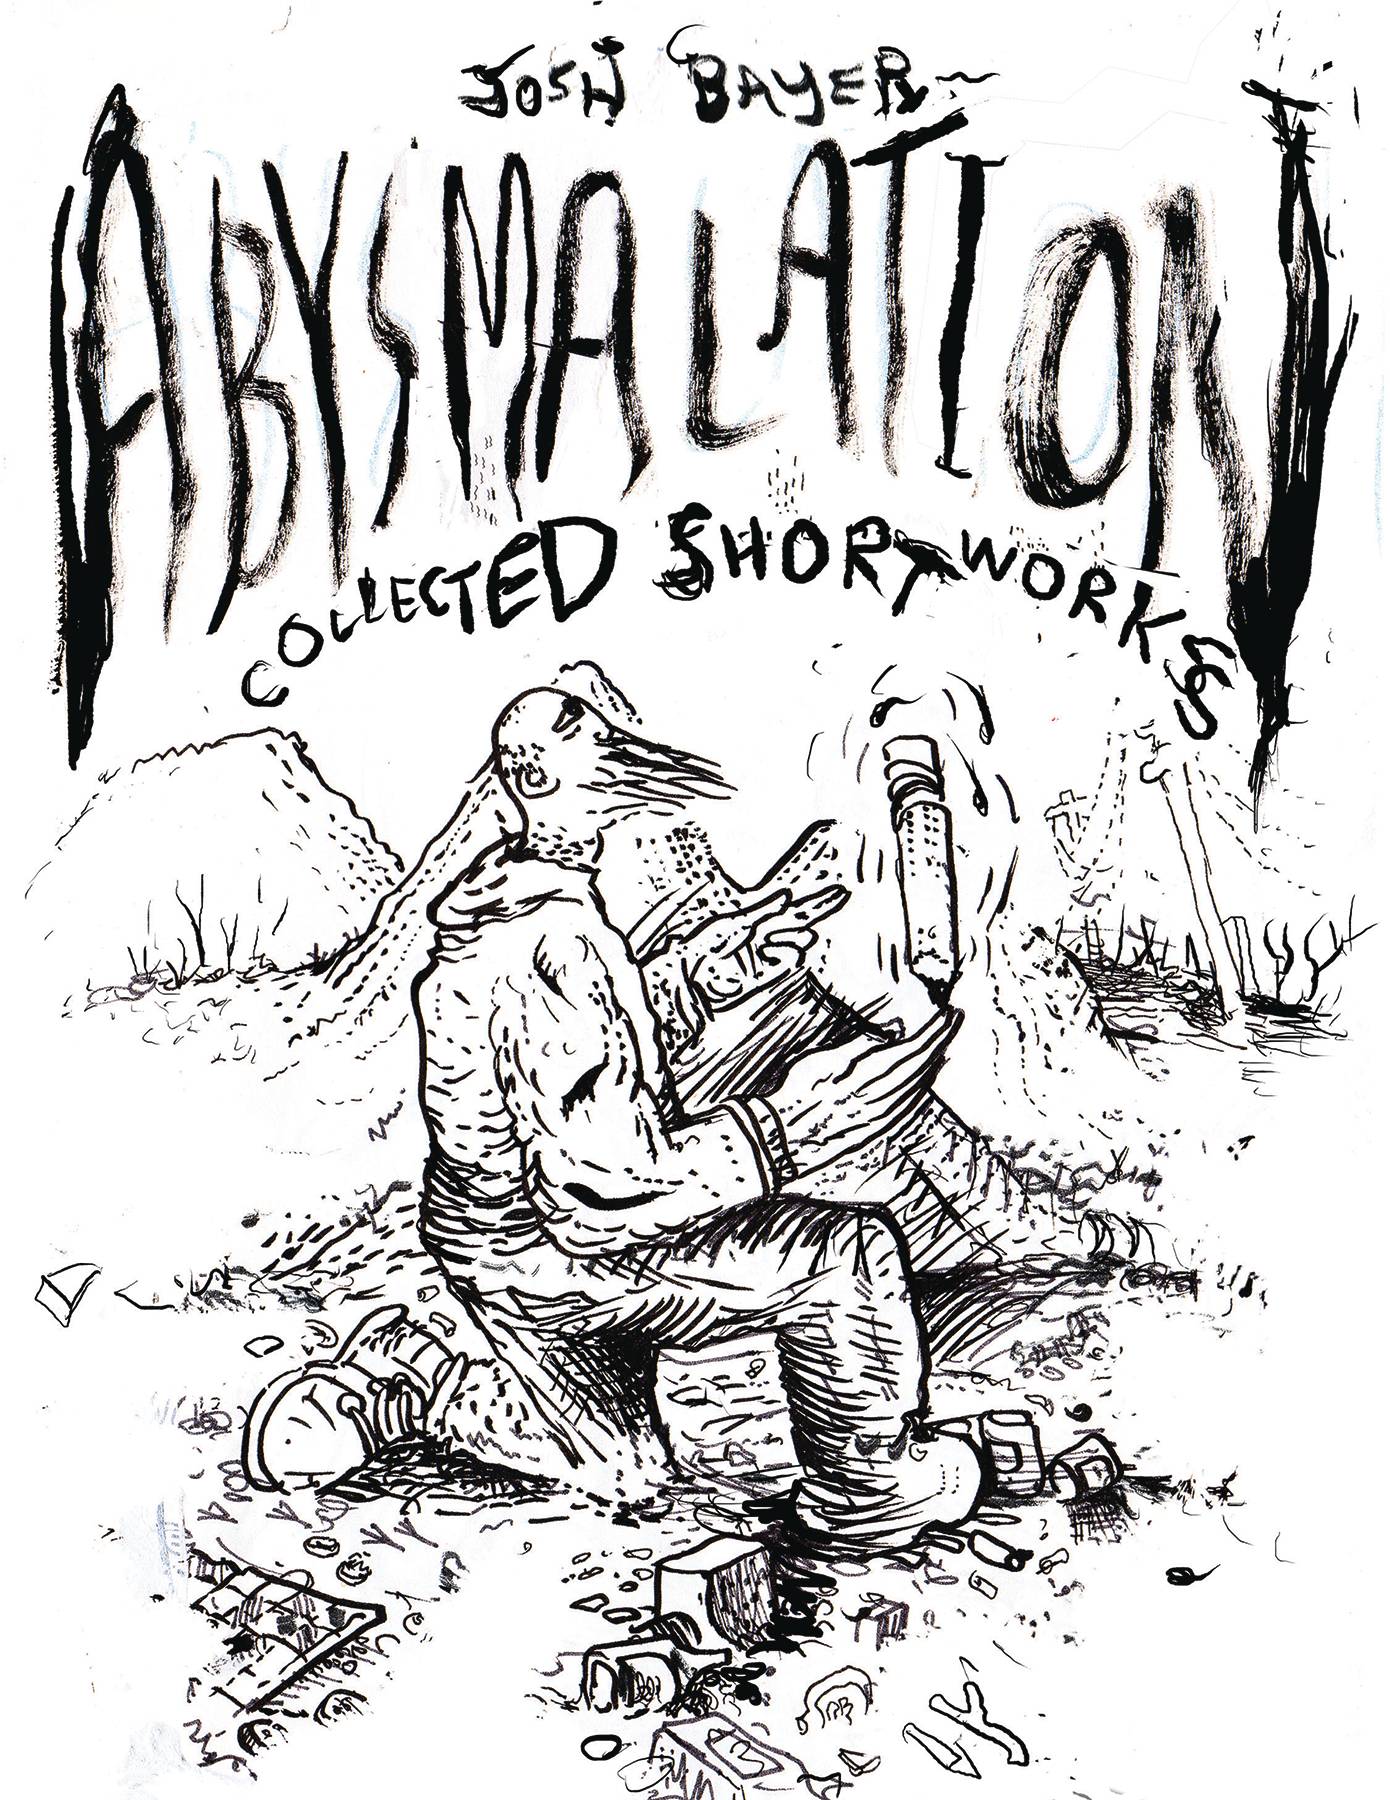 ABYSMALATION COLLECTED SHORT WORKS TP (MR)